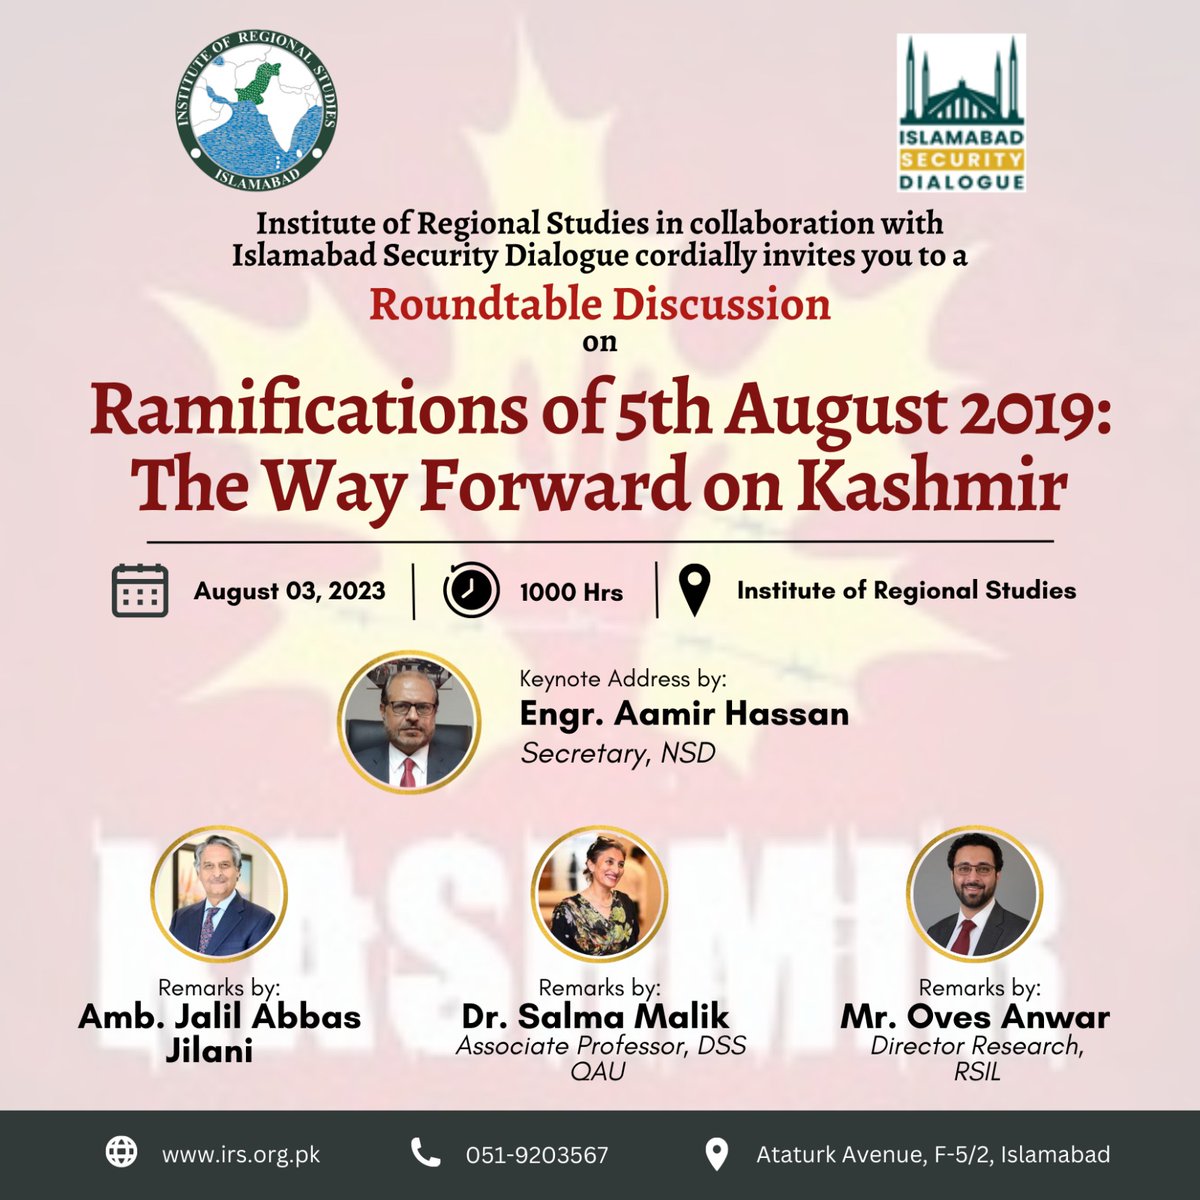 Be part of an insightful discussion jointly organized by @IRSIslamabad and @IsbDialogue titled 'Ramifications of 5th Aug 2019: The Way Forward on Kashmir' on Thursday, 3 Aug 2023 at 1000 hrs. @KCPak4 @ForeignOfficePk @rsilpak @JalilJilani @smalik480 @QAU_Official More details👇